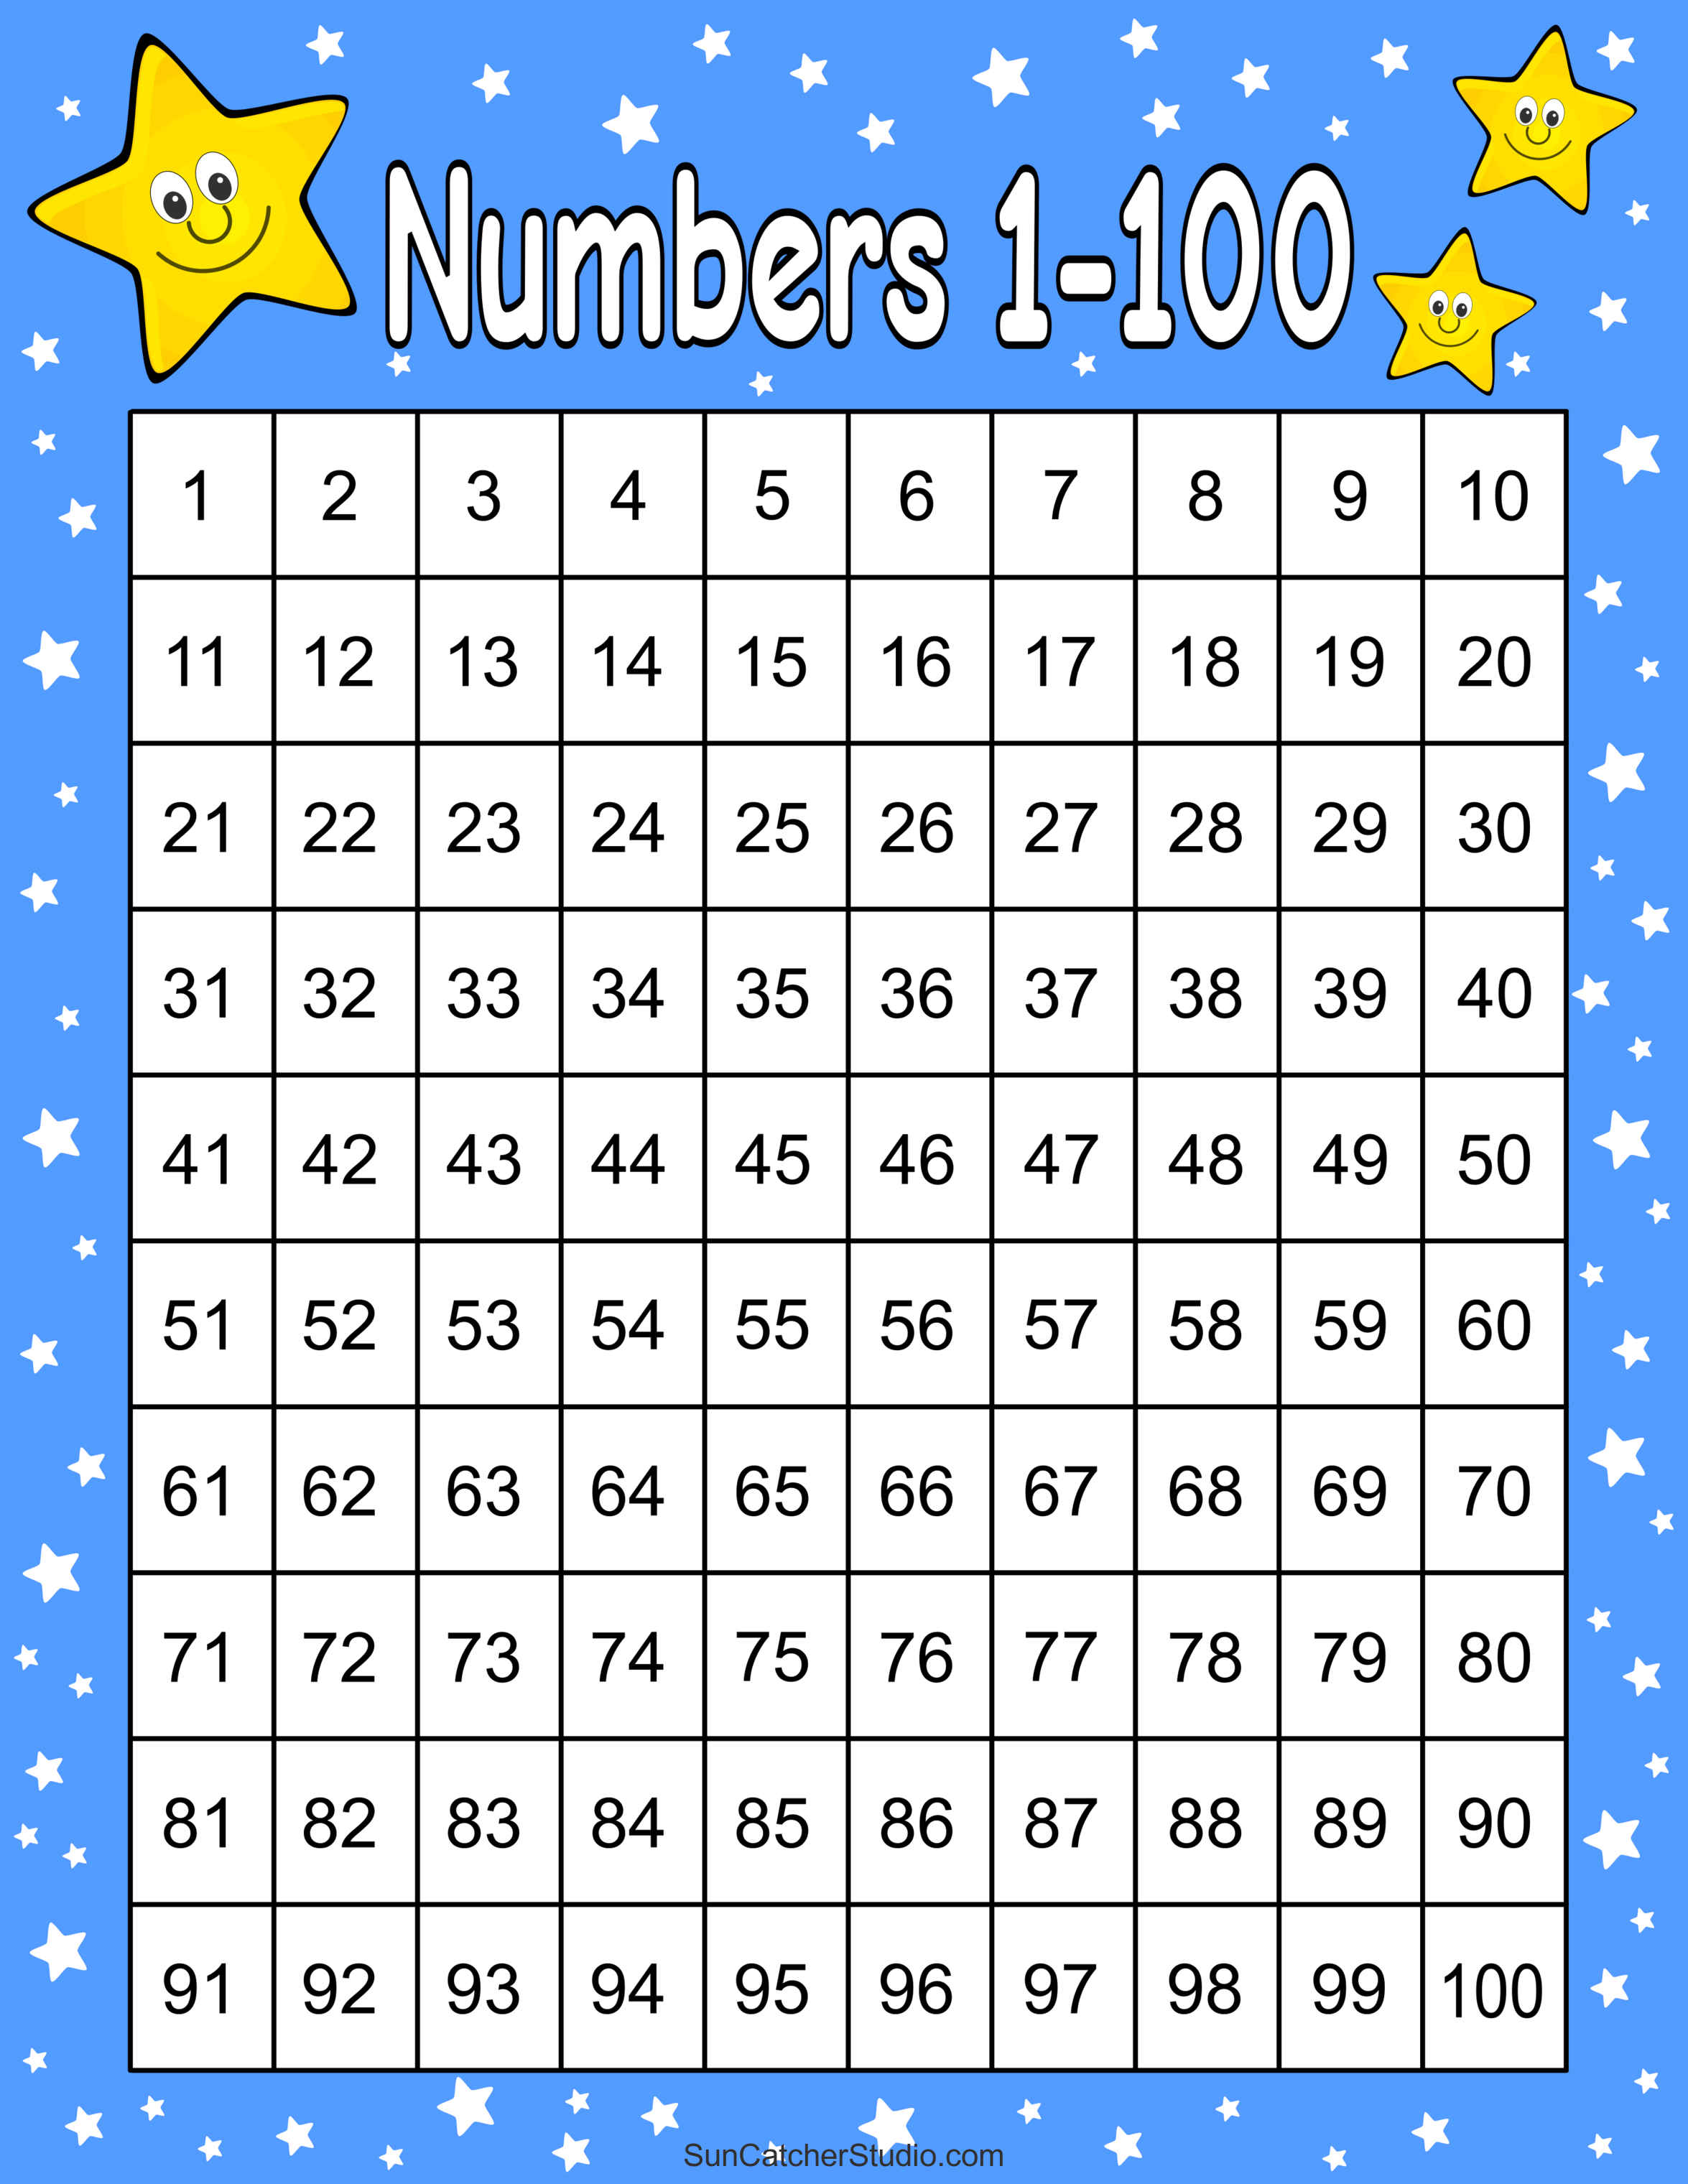 free-printable-hundreds-charts-numbers-1-to-100-diy-projects